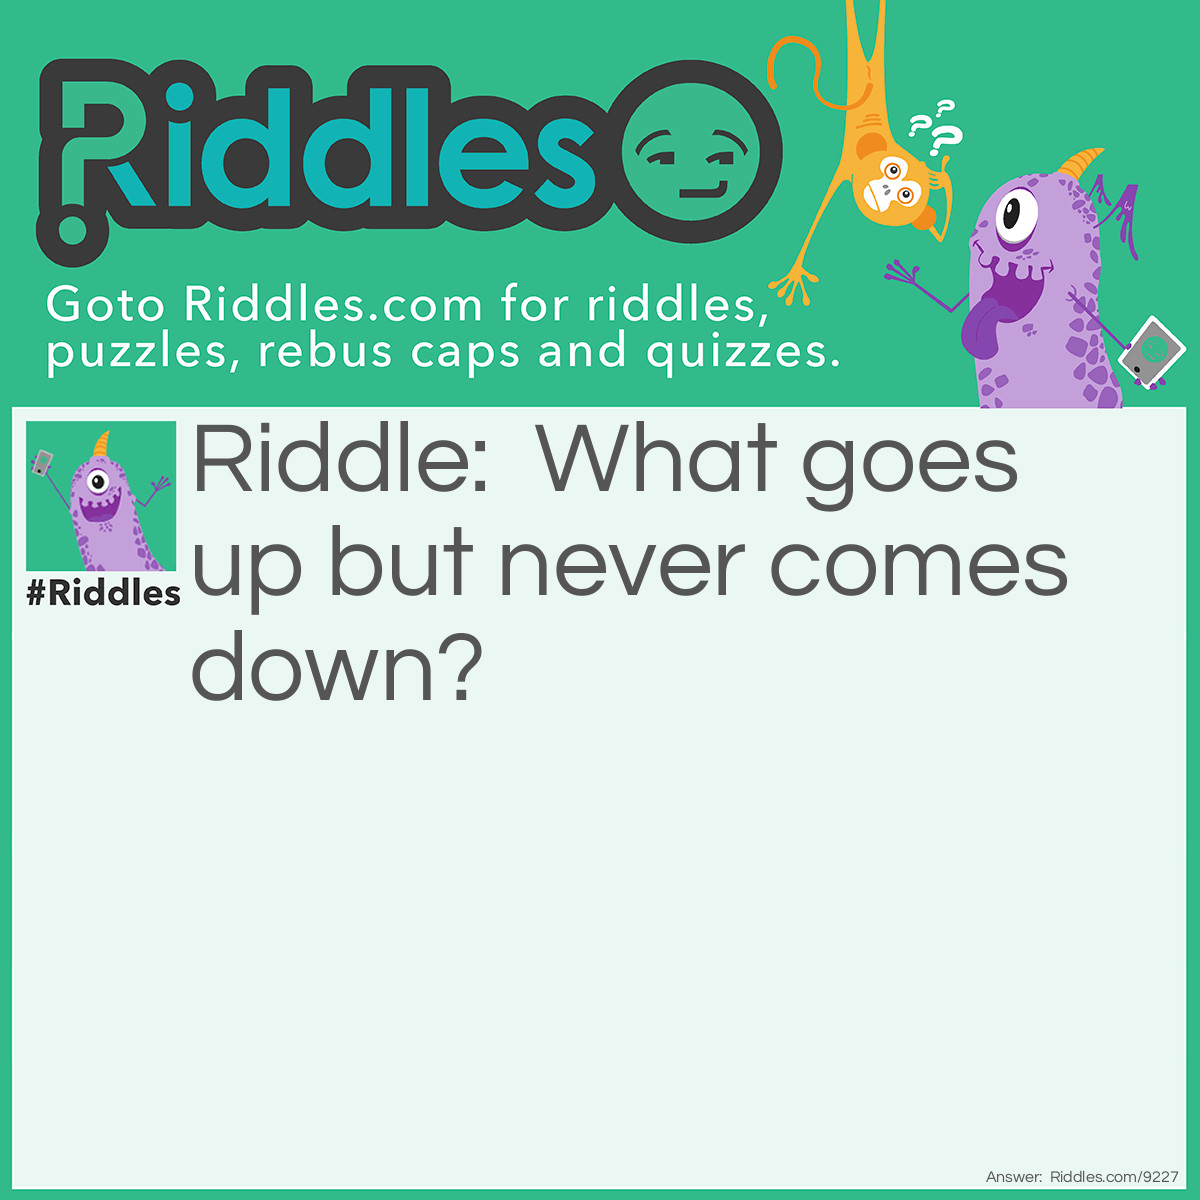 Riddle: What goes up but never comes down? Answer: Age